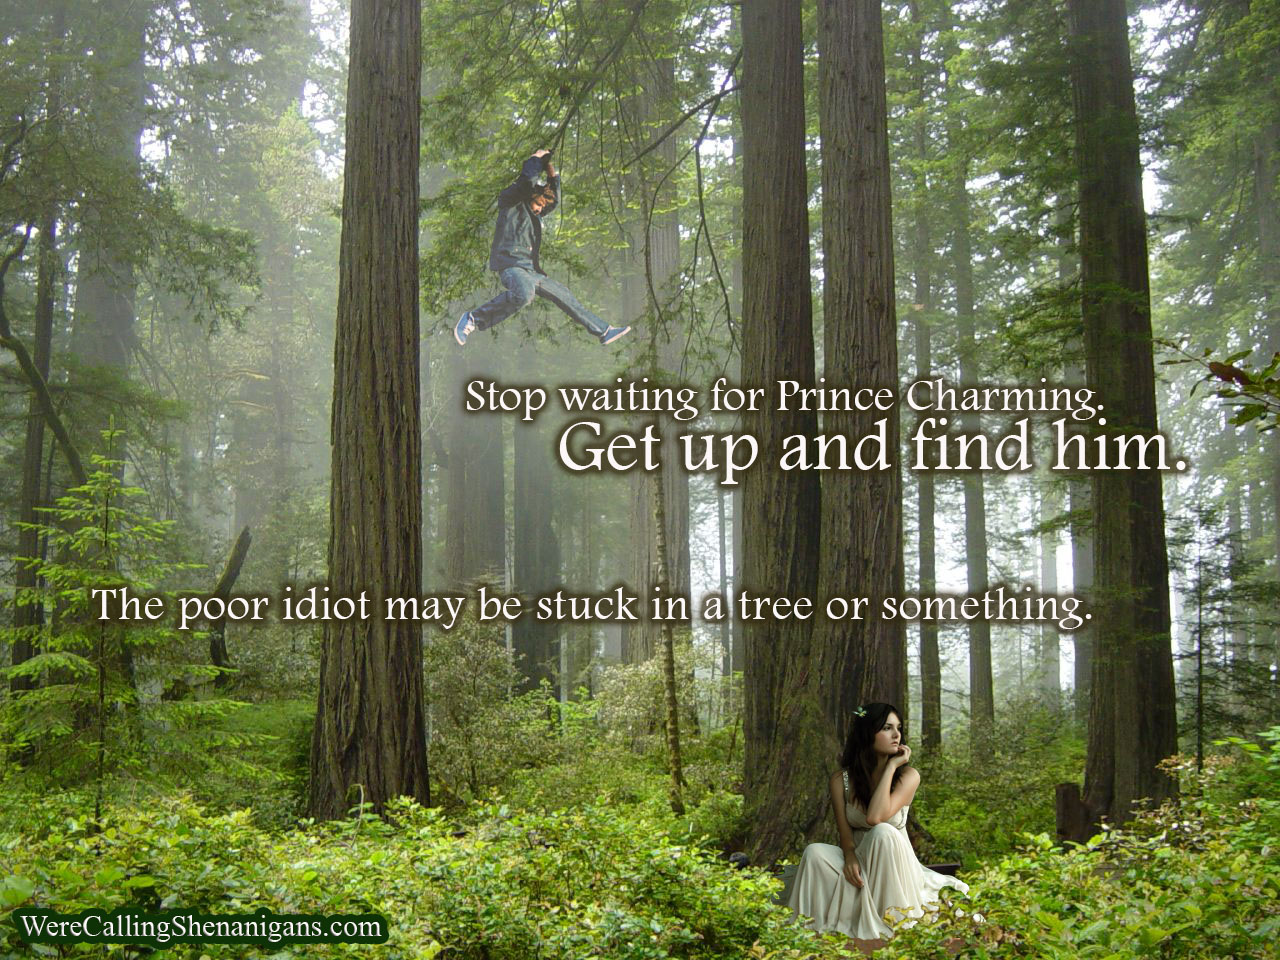 Stop waiting for Prince Charming, Get up and fine him, the poor idiot may be stuck in a tree